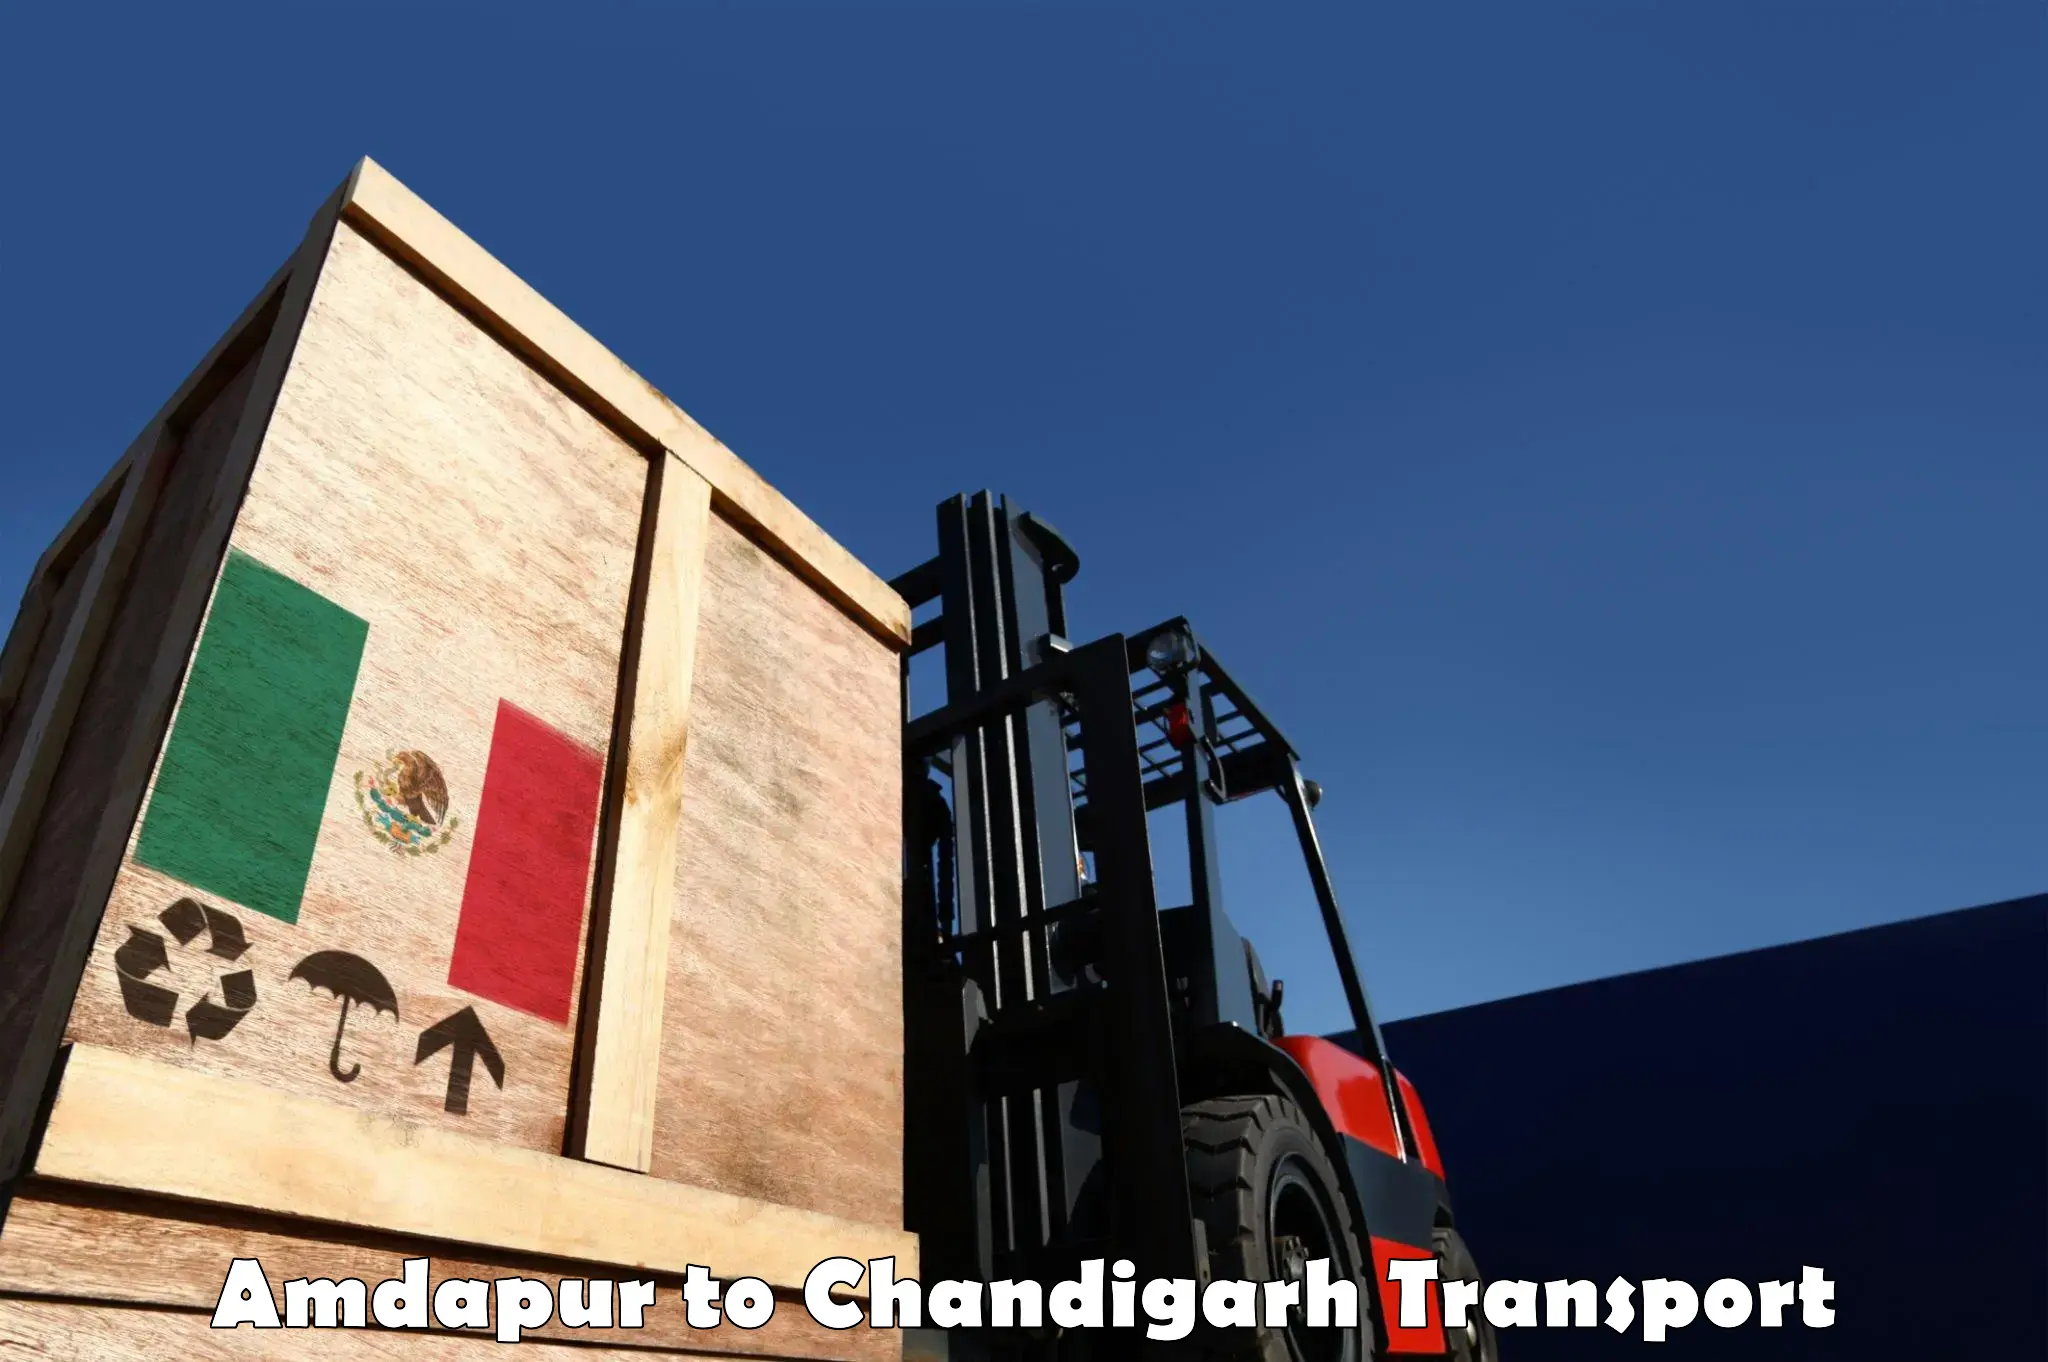 Vehicle transport services in Amdapur to Chandigarh